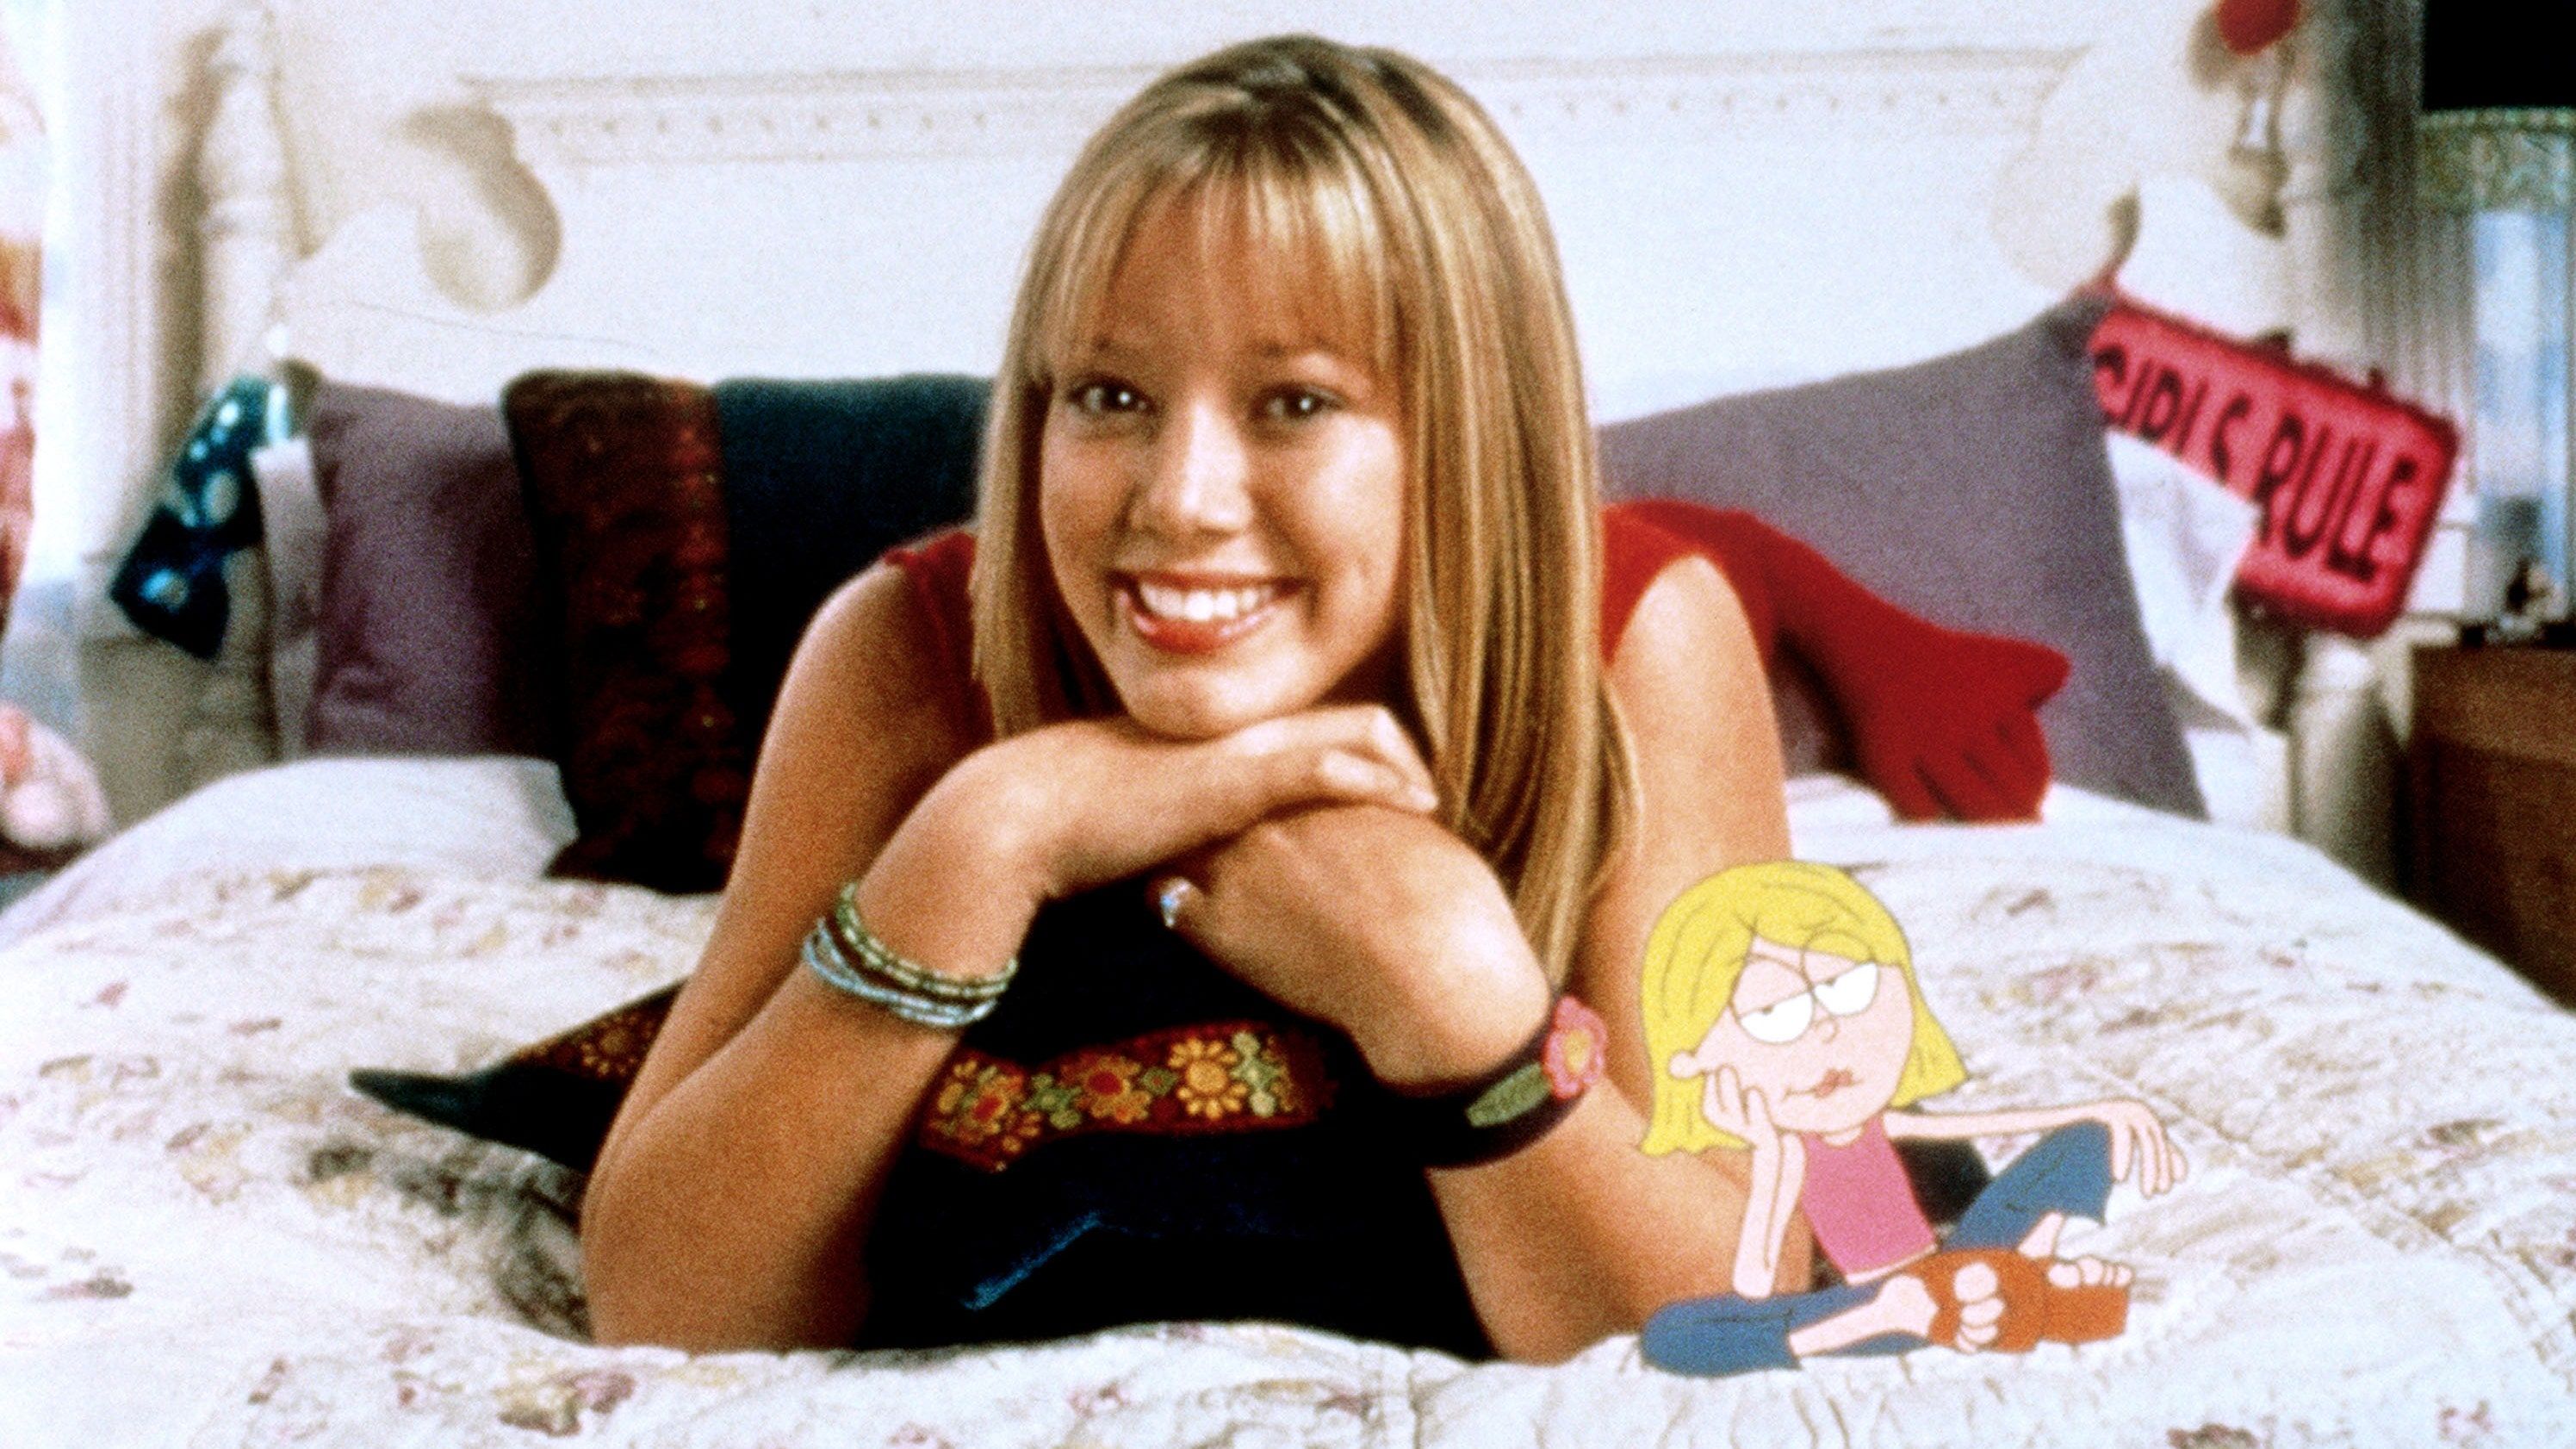 Hilary Duff Is Officially Coming Back as Lizzie McGuire in a New TV Series